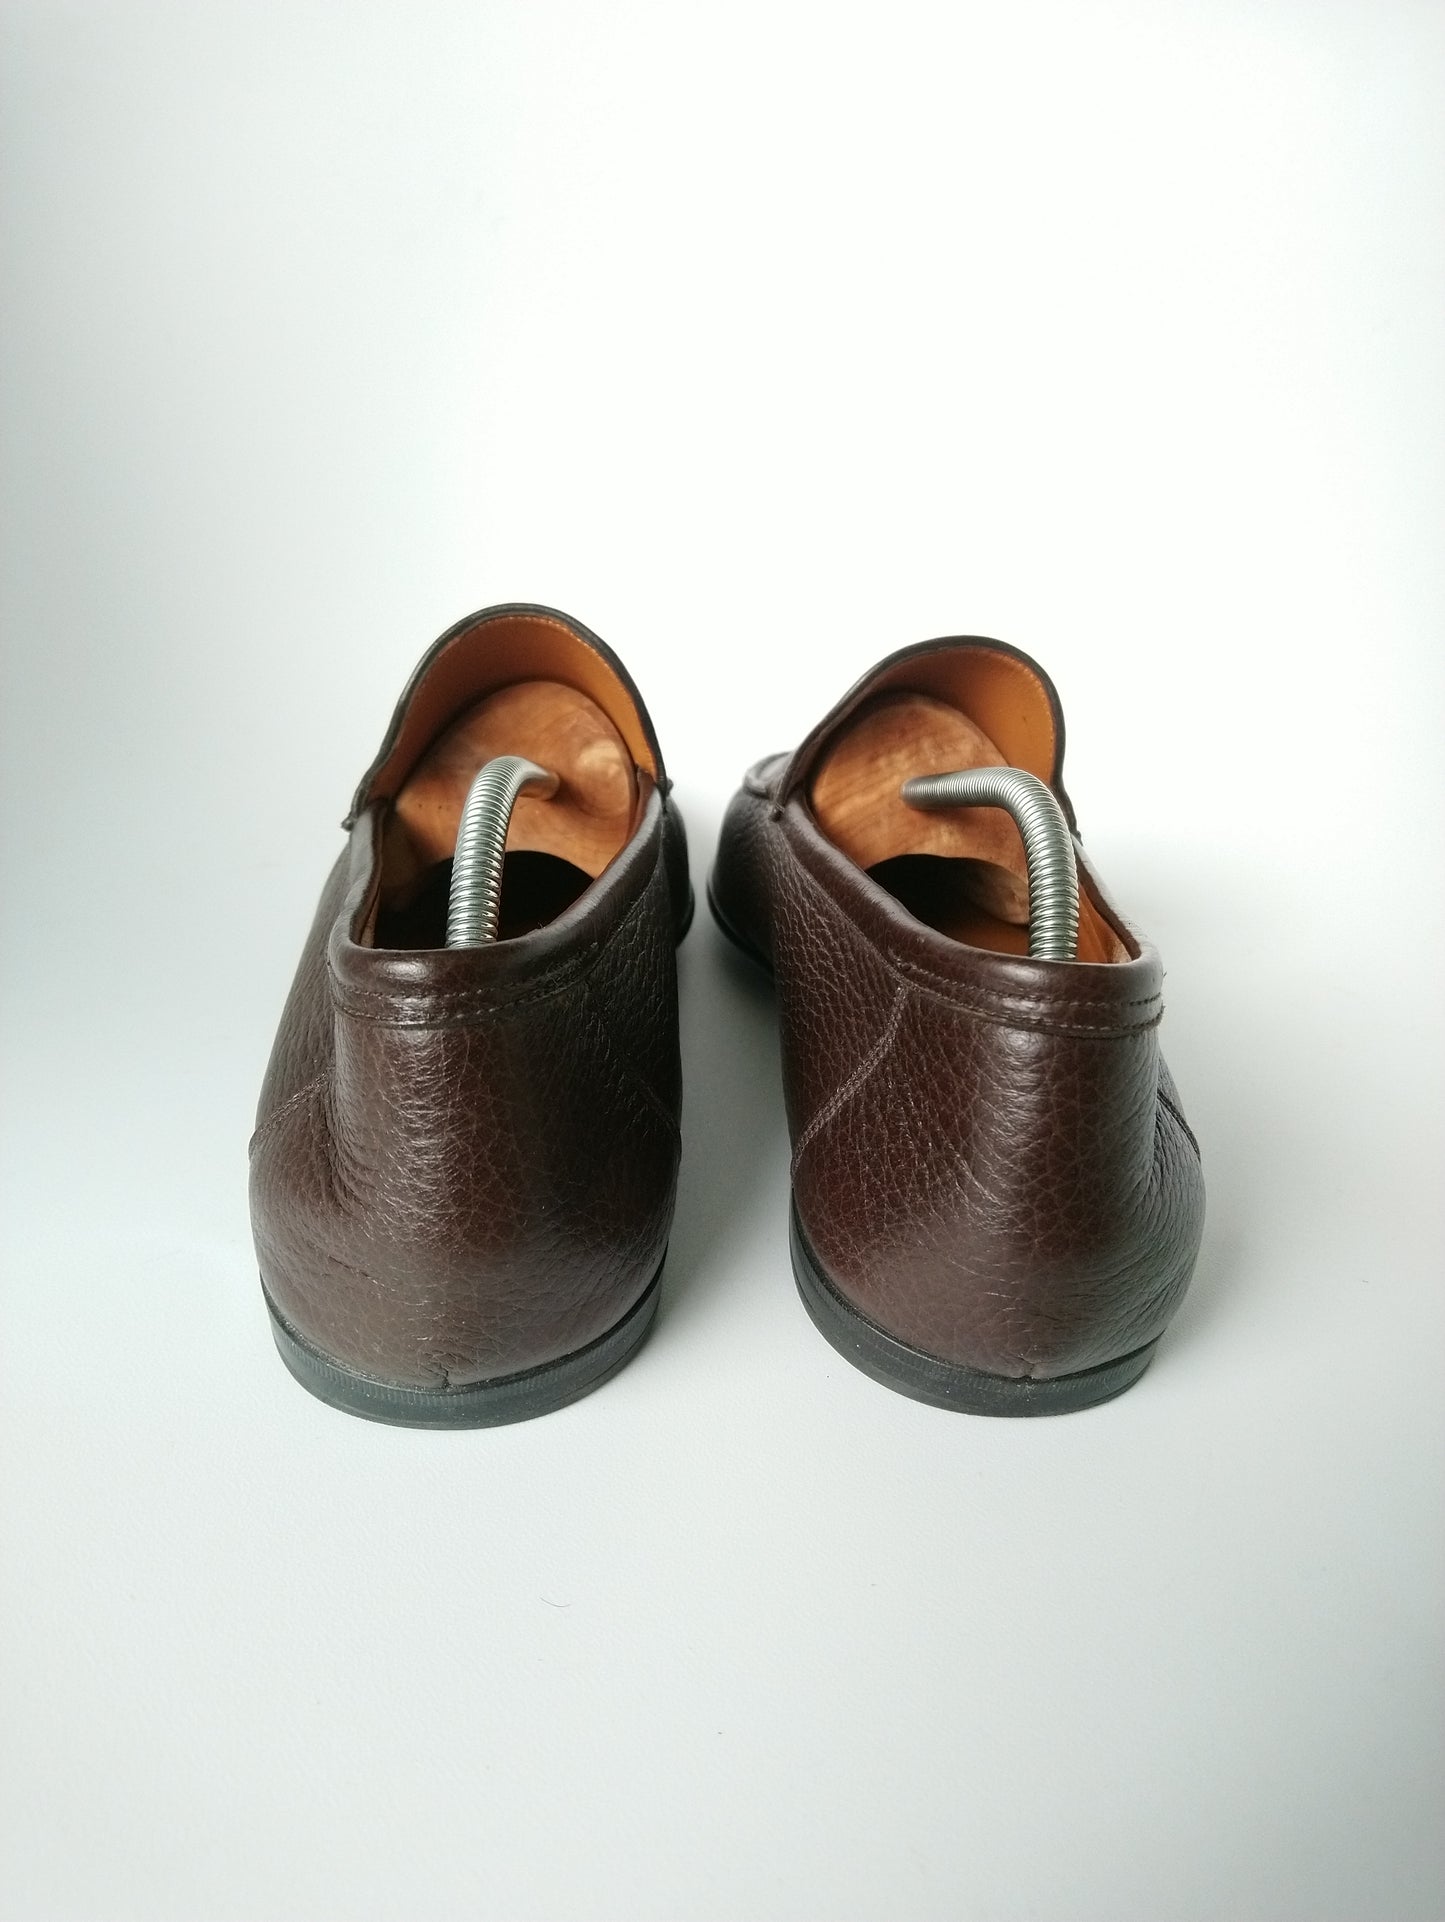 Bally learn moccasins. Dark brown colored. Size 39.5.